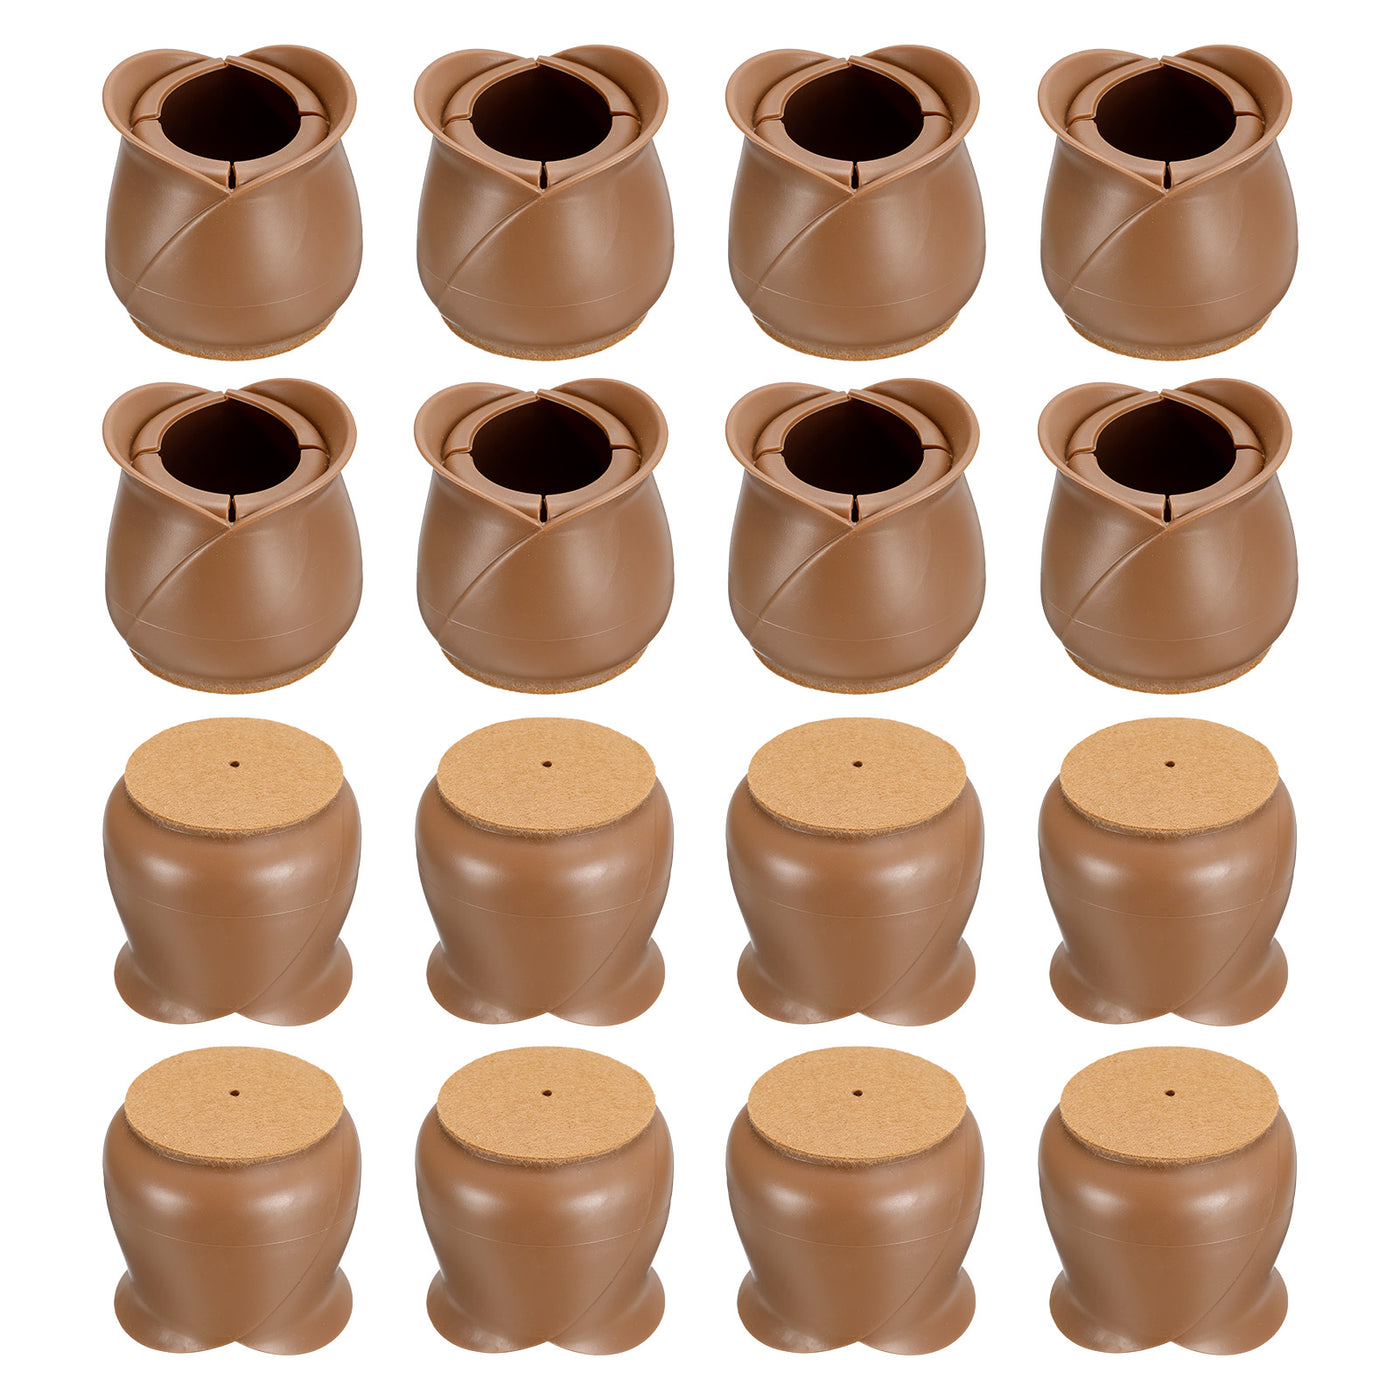 uxcell Uxcell Chair Leg Floor Protectors, 16Pcs 39mm(1.54") Silicone & Felt Chair Leg Cover Caps for Hardwood Floors (Coffee)